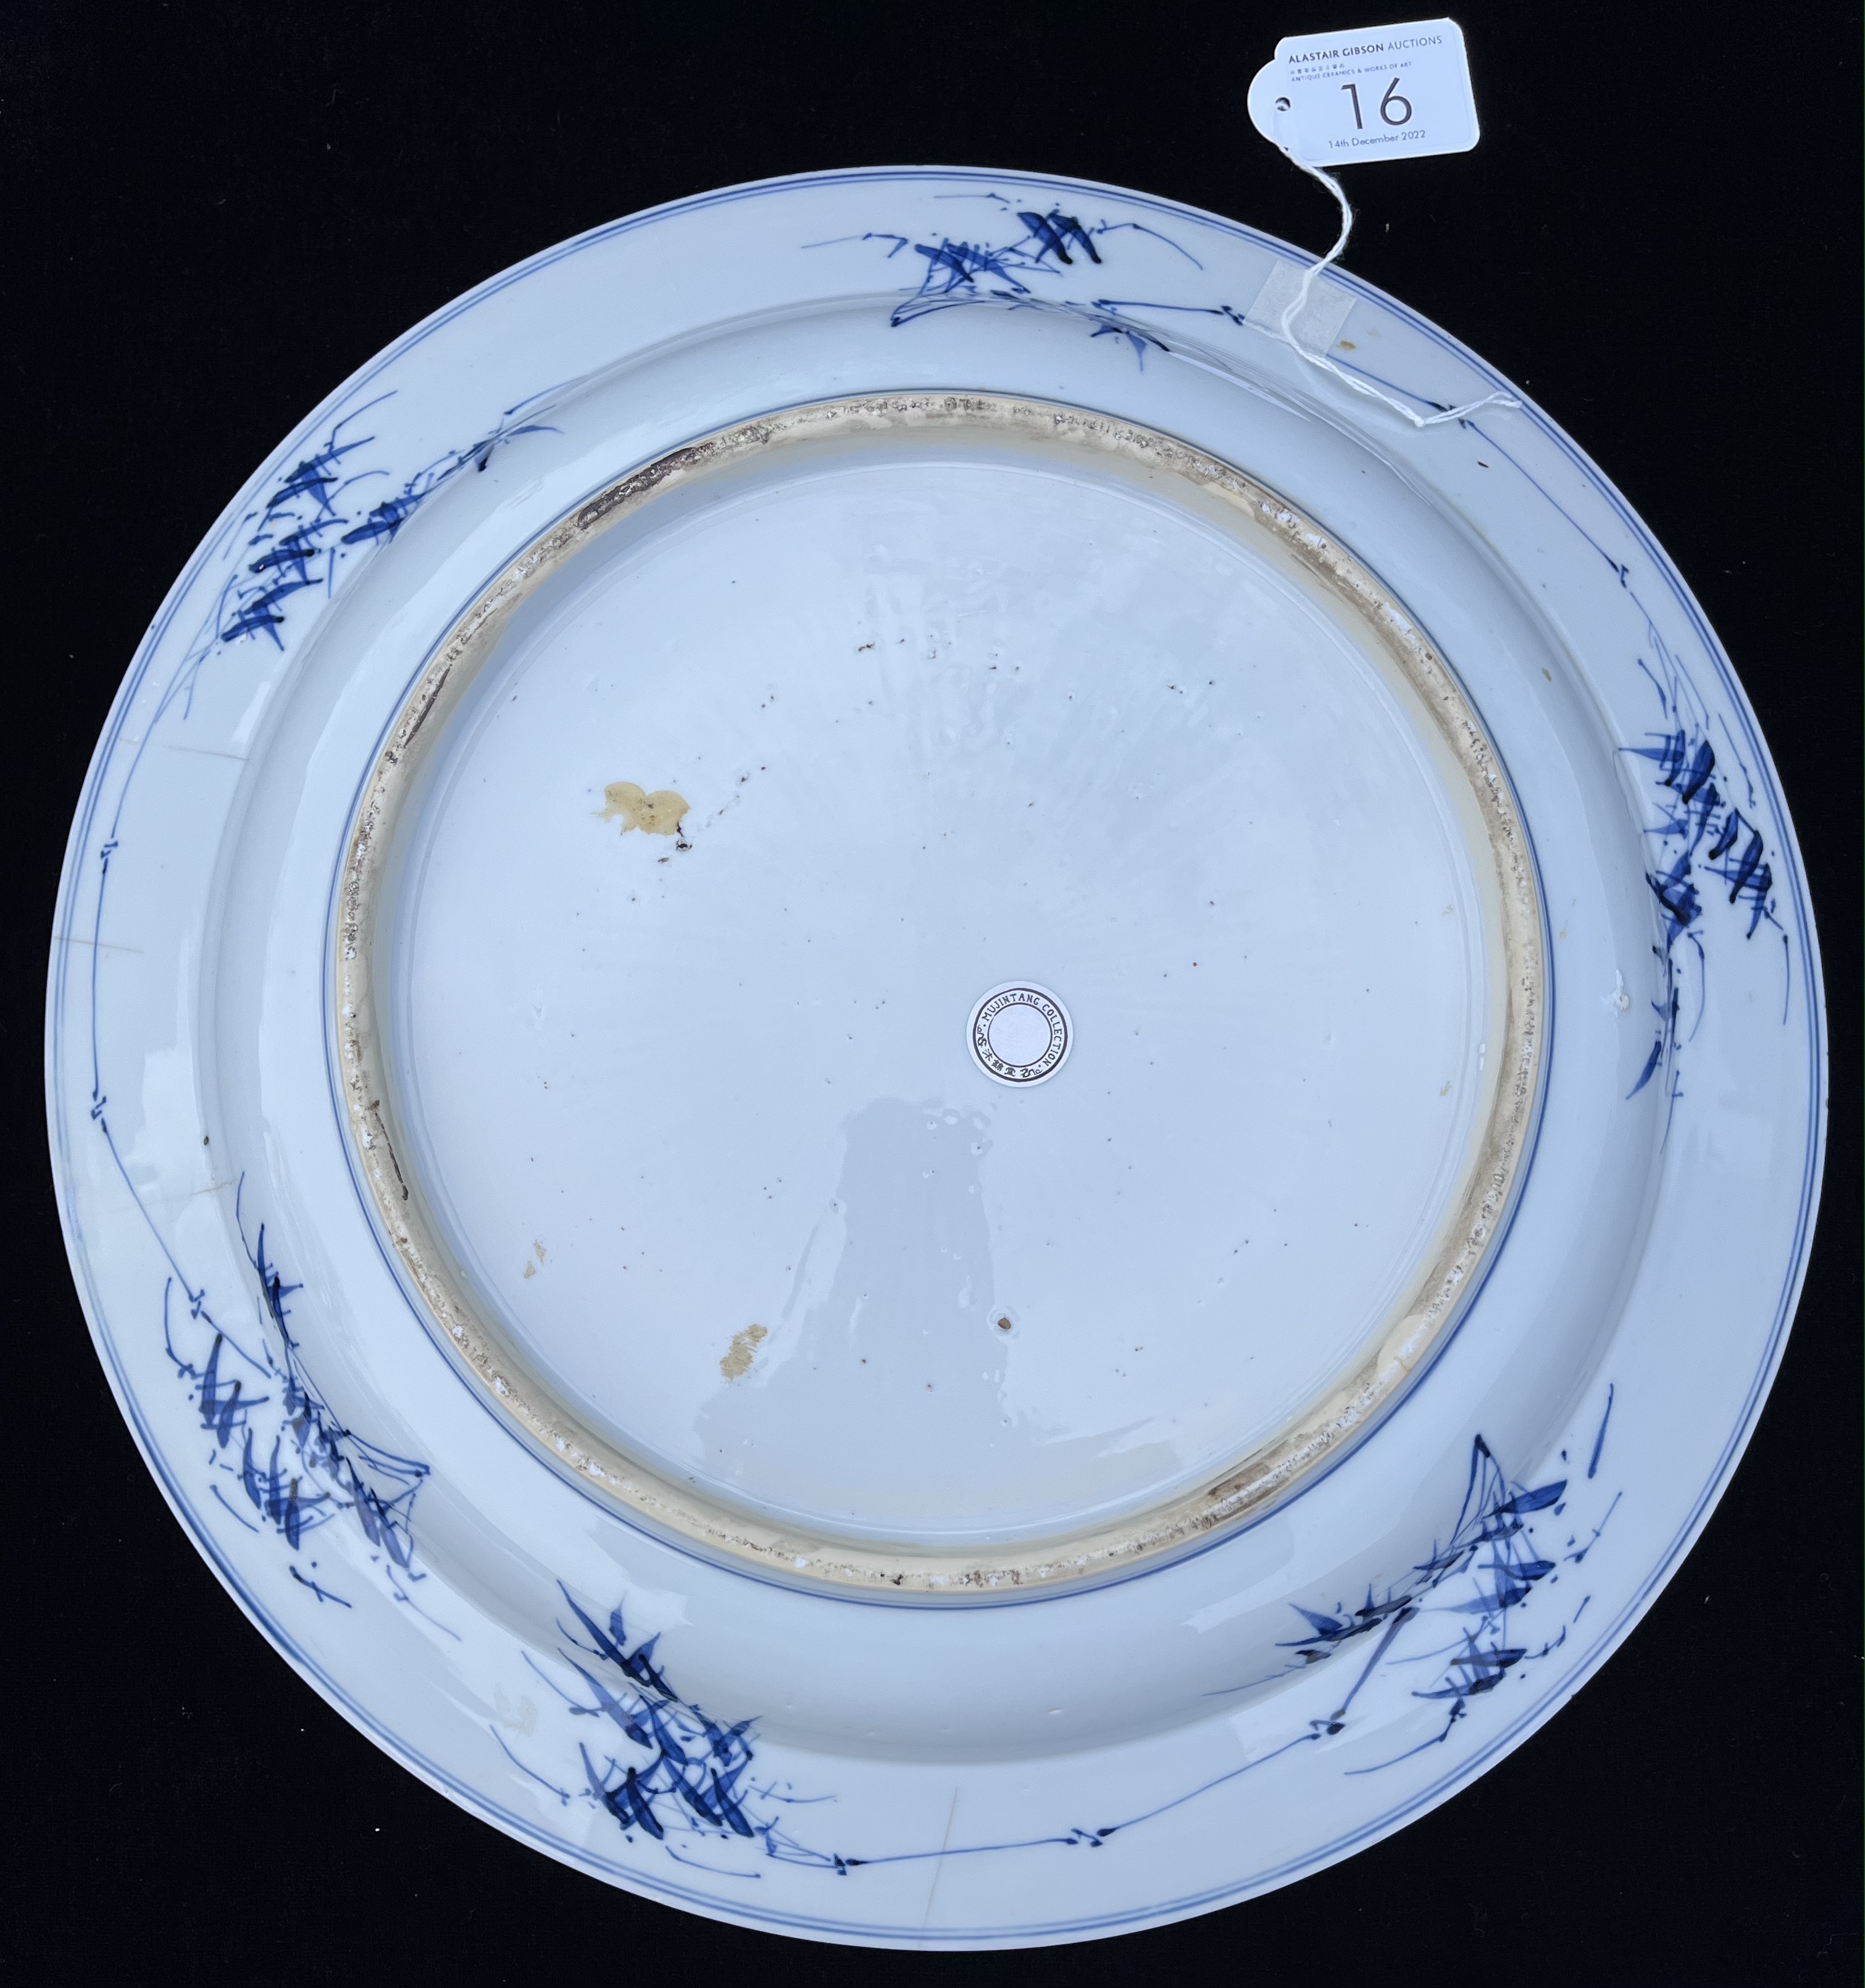 A CHINESE BLUE AND WHITE PORCELAIN ‘MUSICIANS' DISH, QING DYNASTY, KANGXI PERIOD, 1662 – 1722 - Image 6 of 11